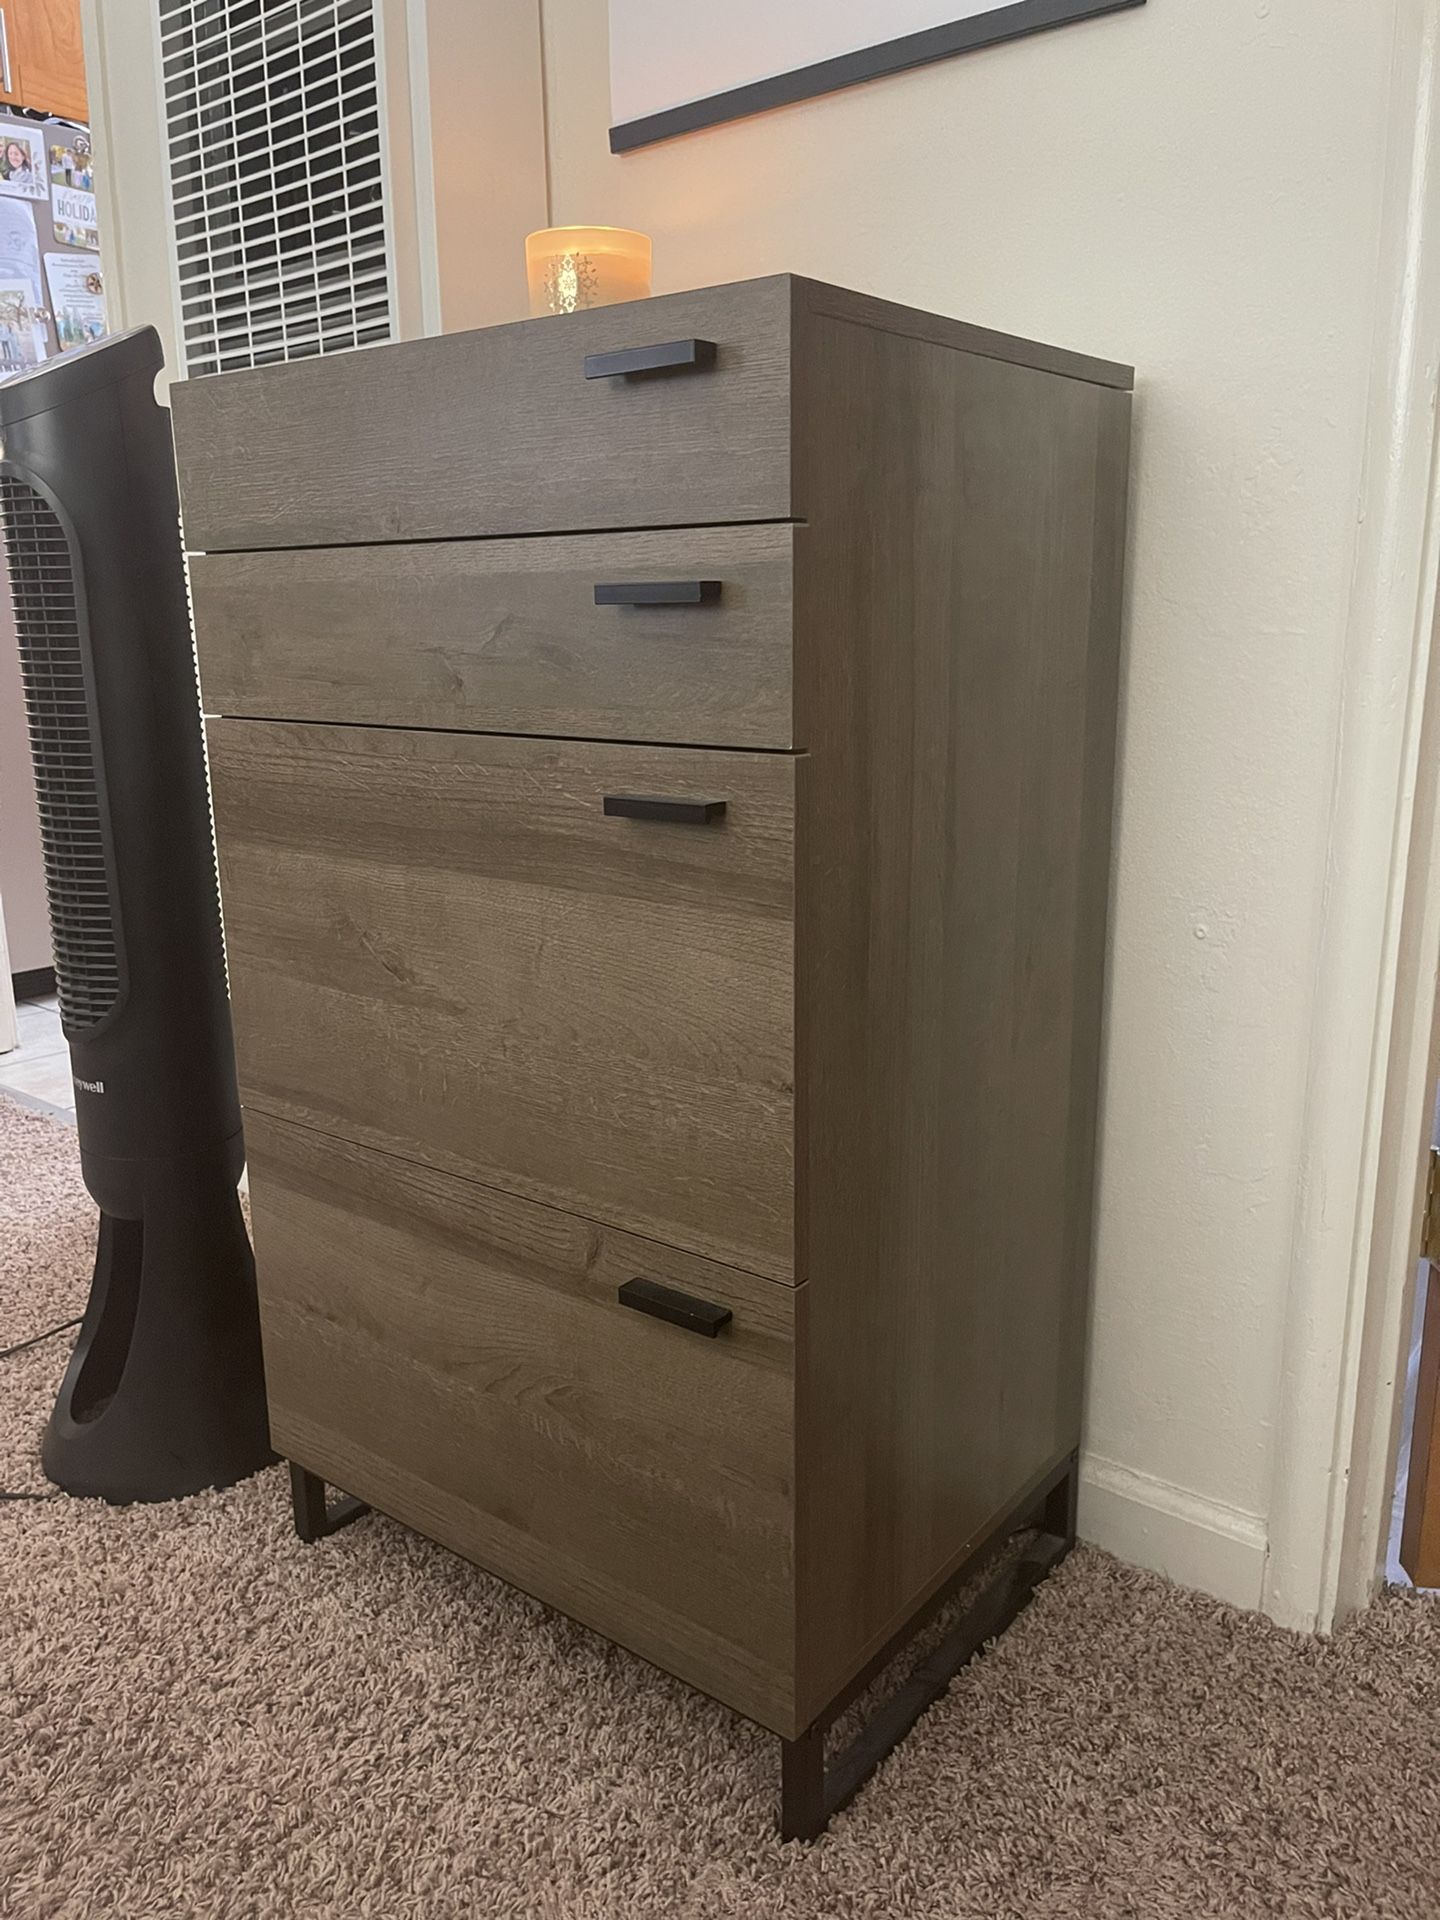 4 Drawers (Tall Chest of Drawers)